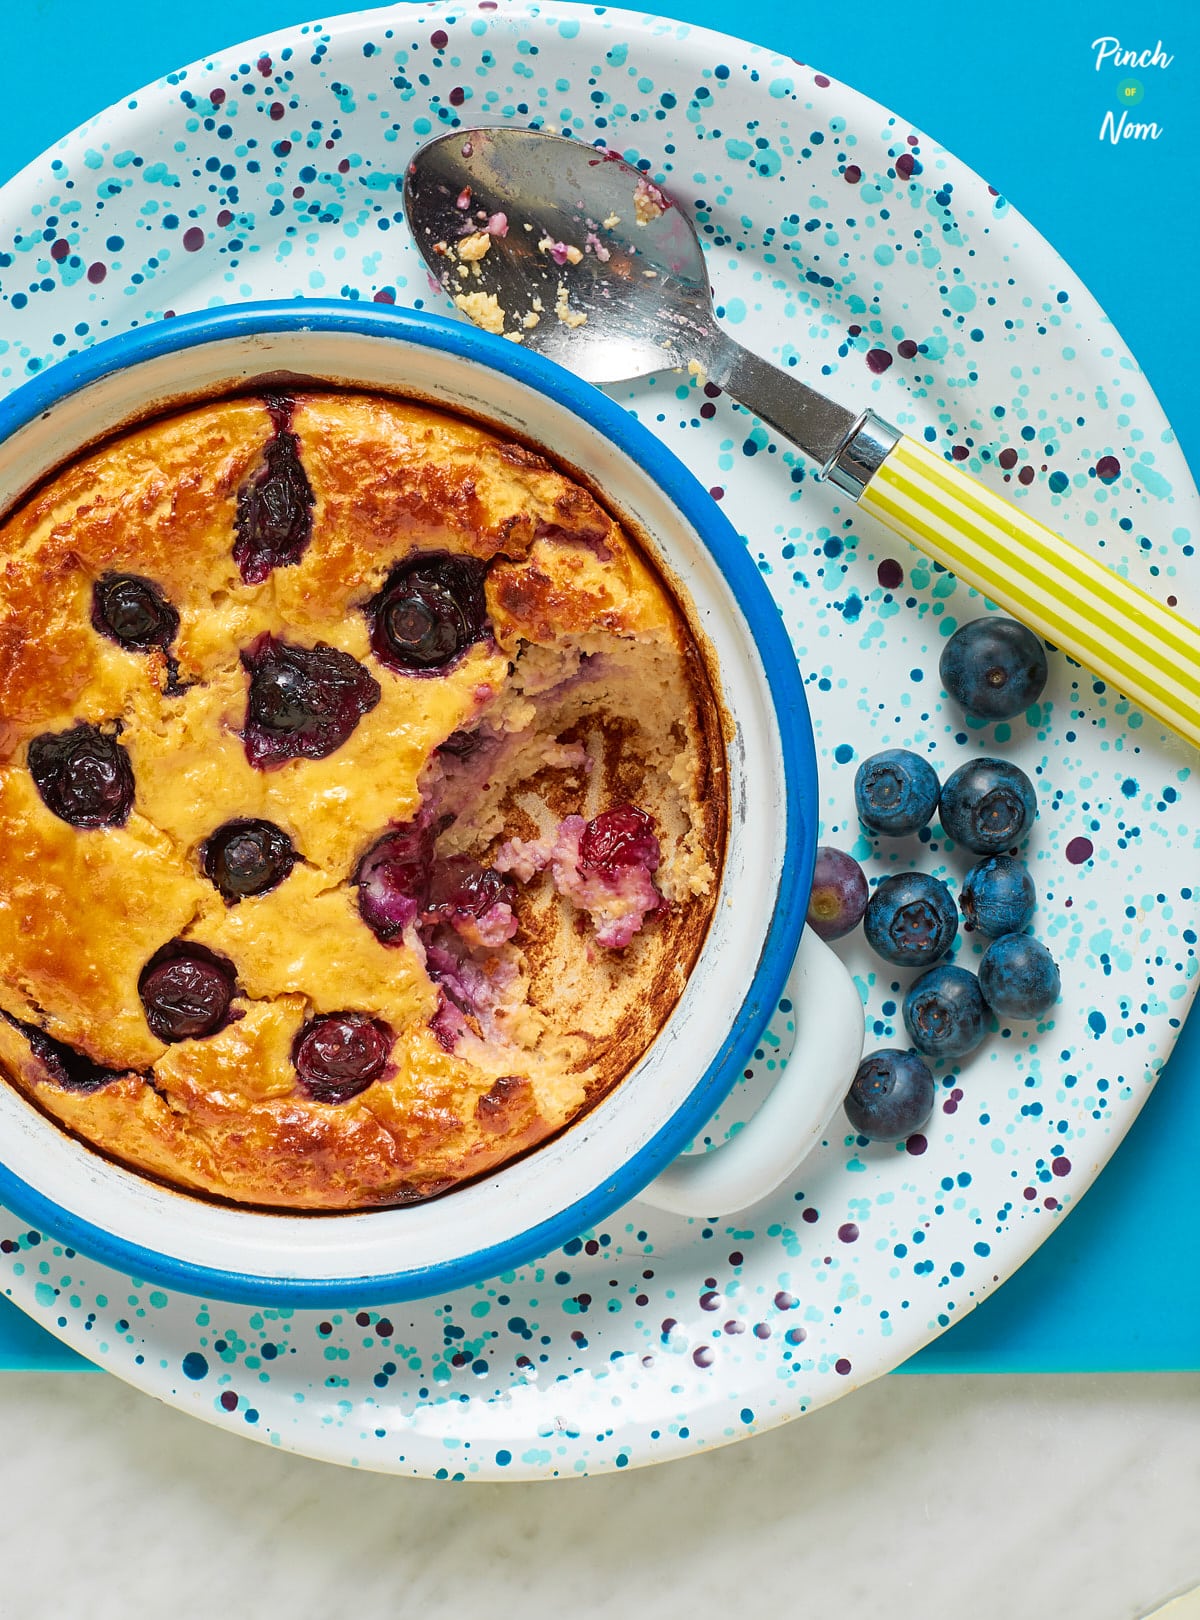 Lemon and Blueberry Baked Oats - Pinch of Nom Slimming Recipes